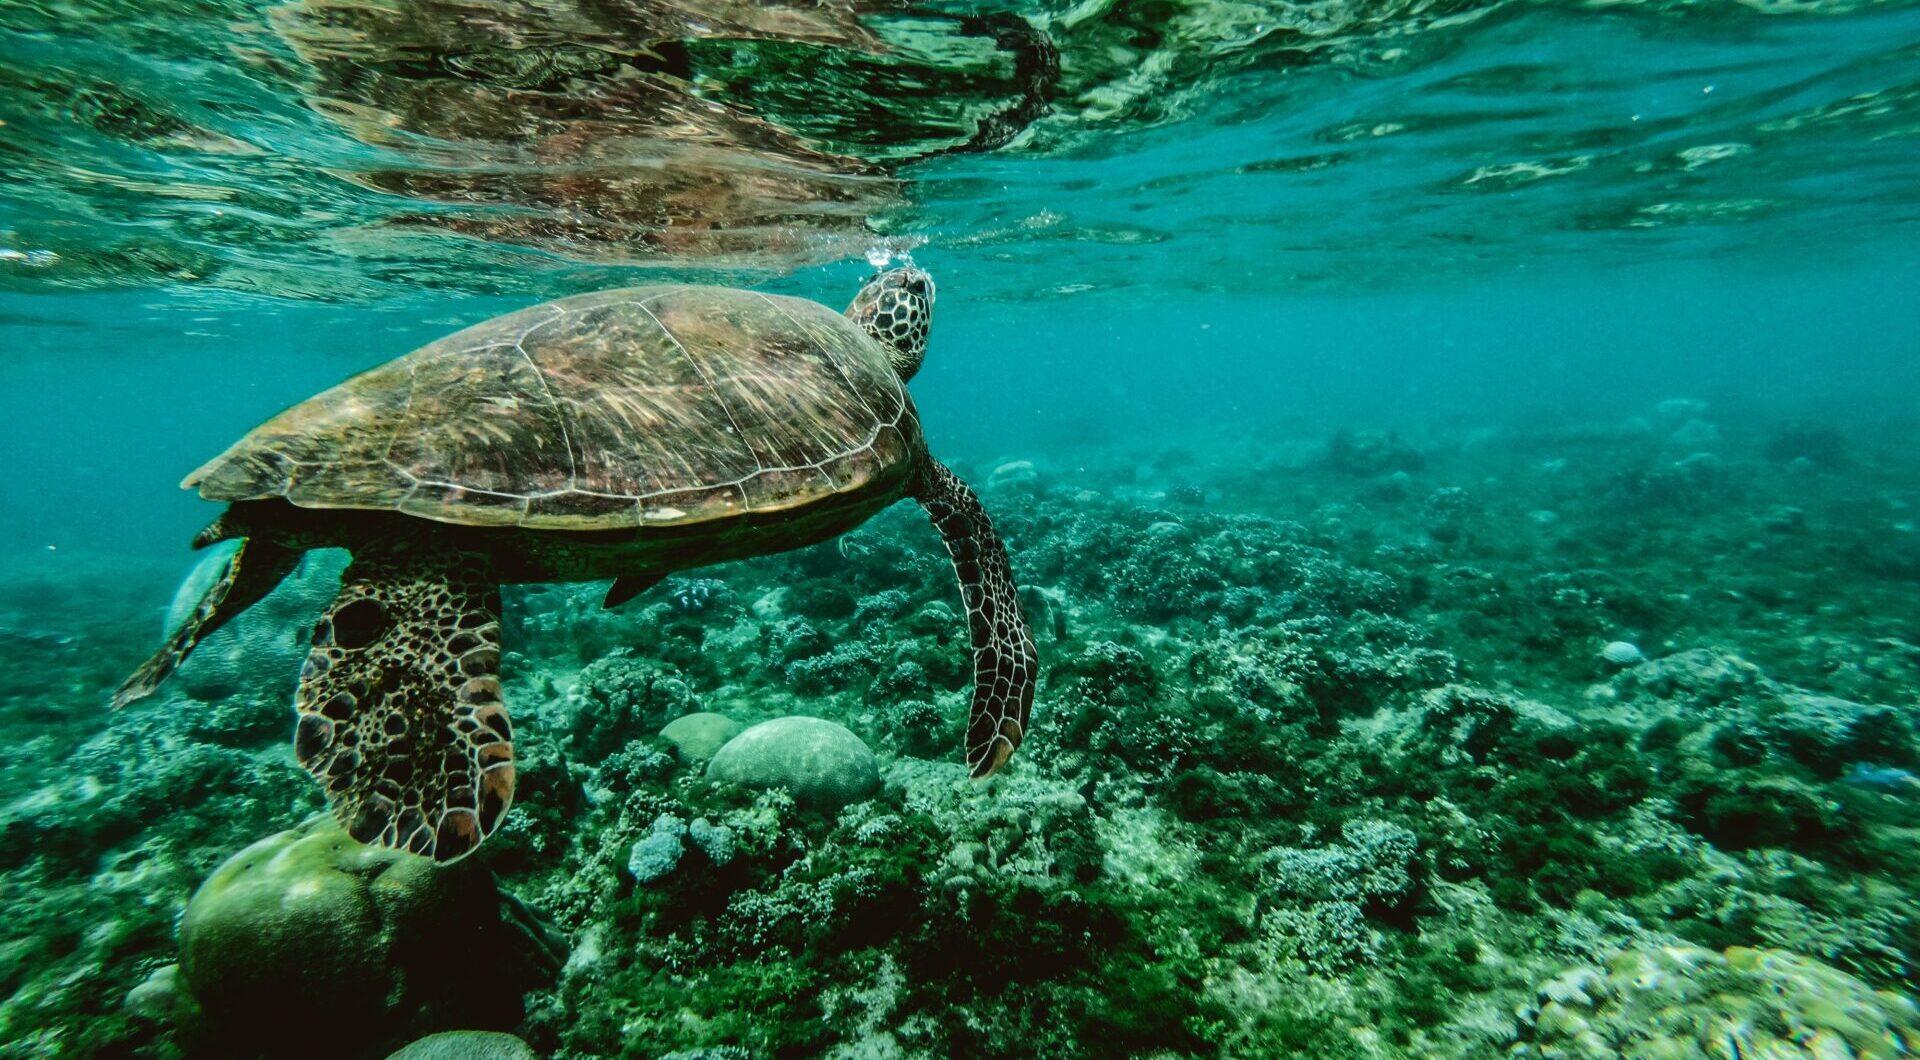 Sea turtle swimming above a beautiful green and yellow reef in the ocean